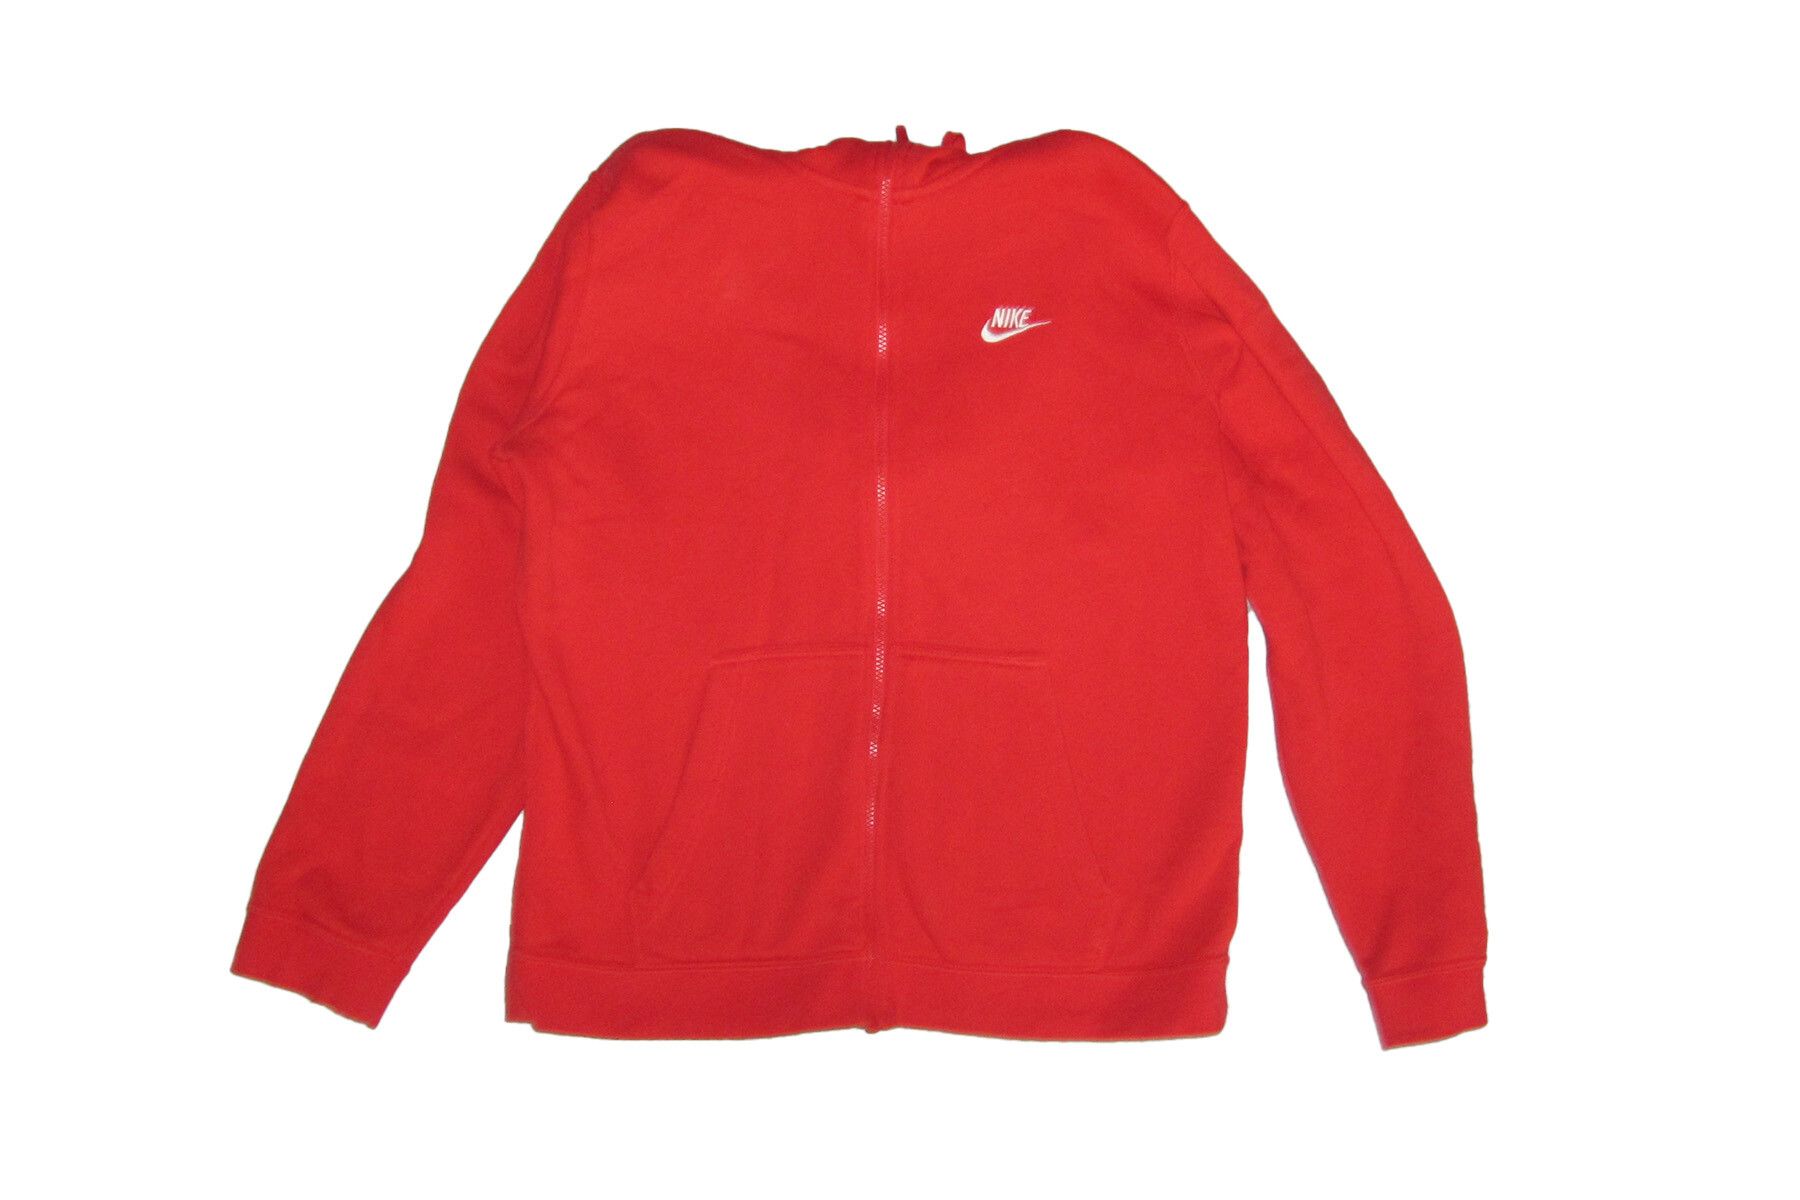 Nike Red Nike Zip Up Hoodie Size US L / EU 52-54 / 3 - 1 Preview